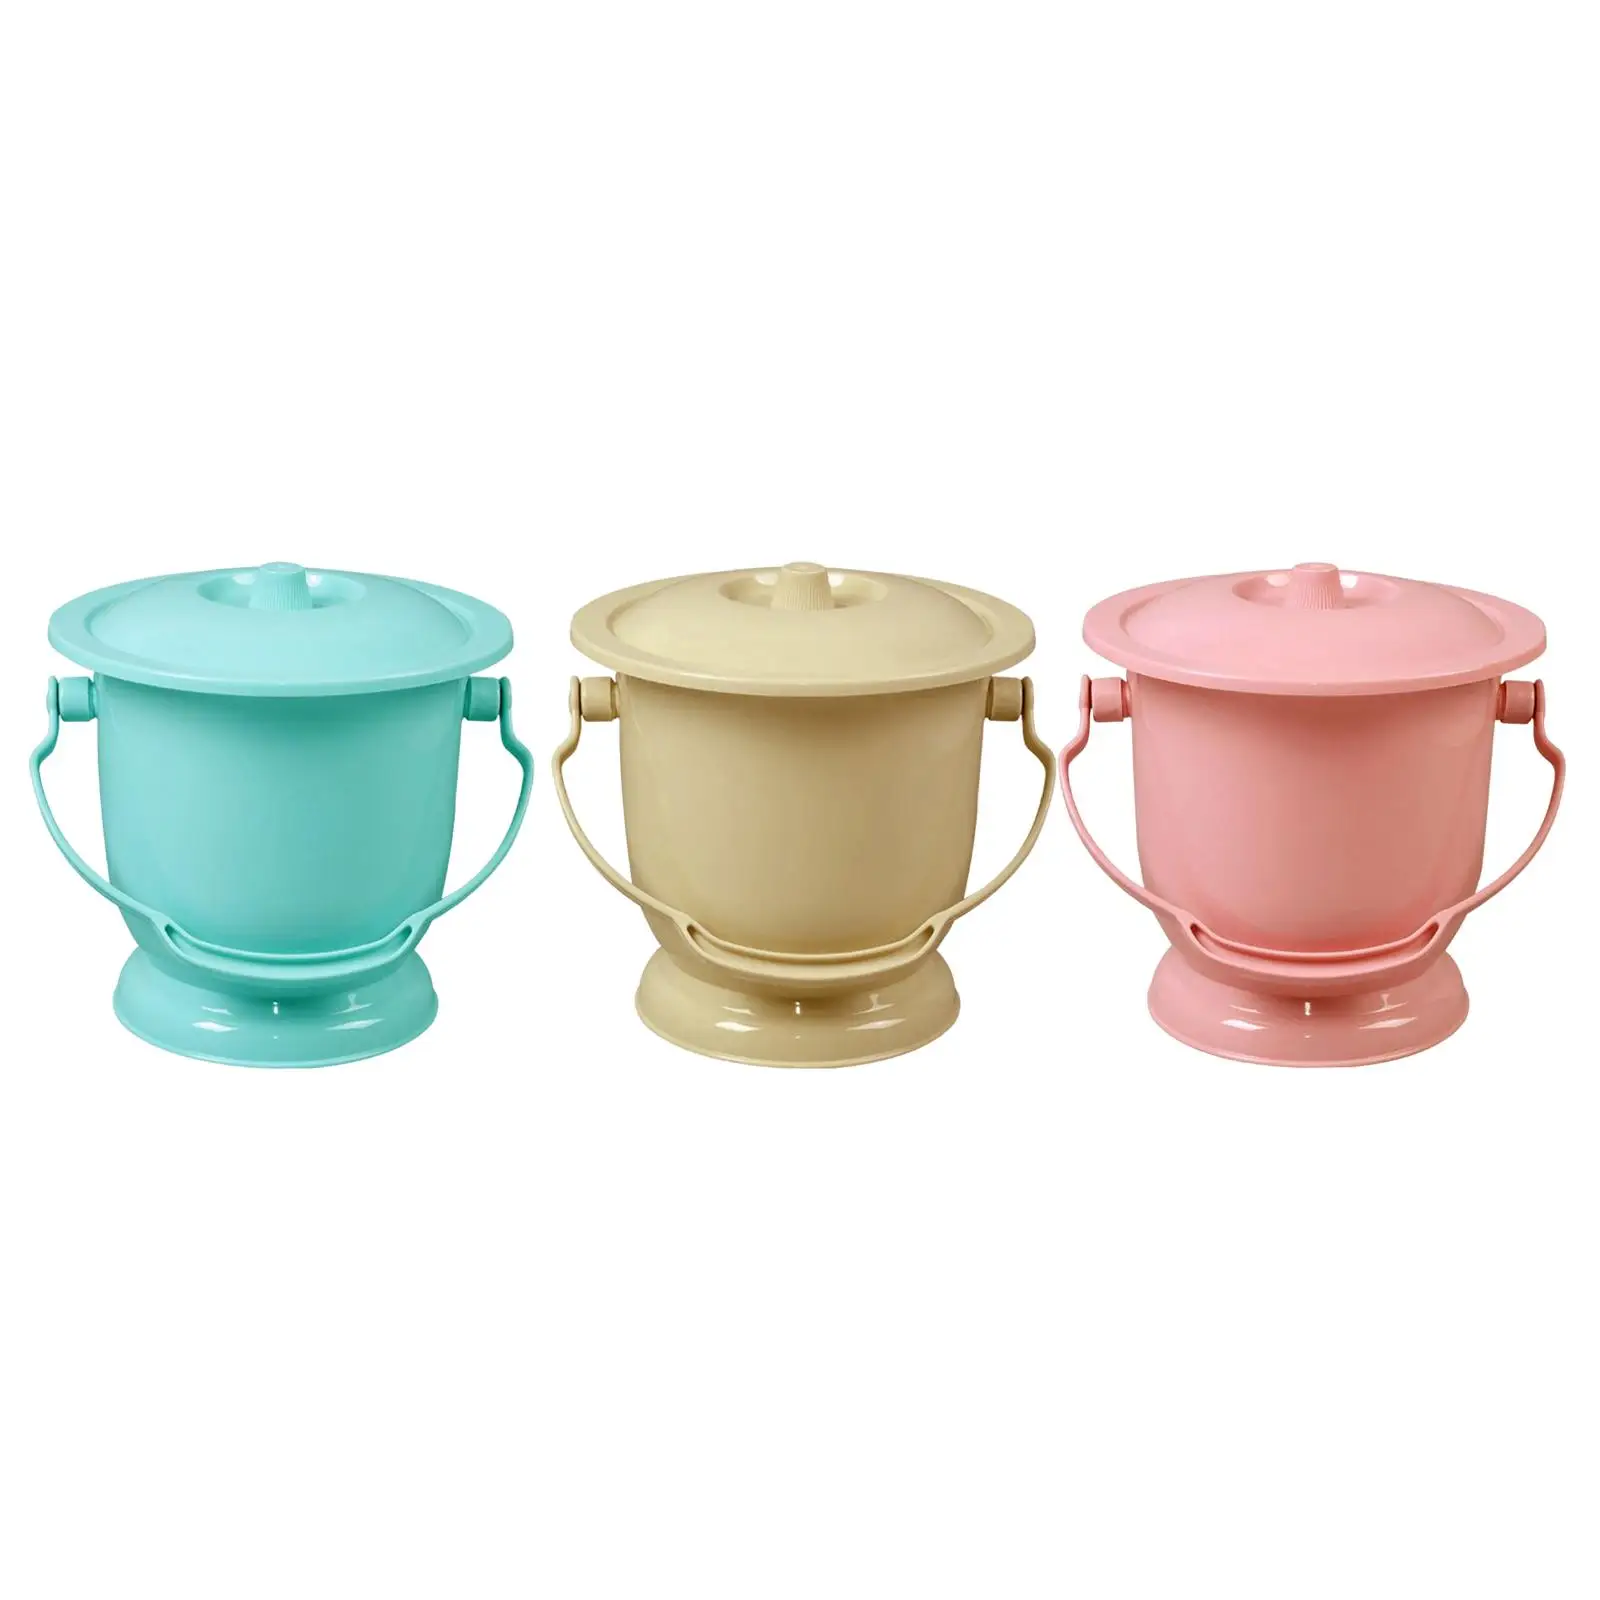 Household Chamber Pot with Lid, Bedpan Spittoon Handheld Bedroom Portable Children Adults Bright Color Night Pot Urinal Bottle